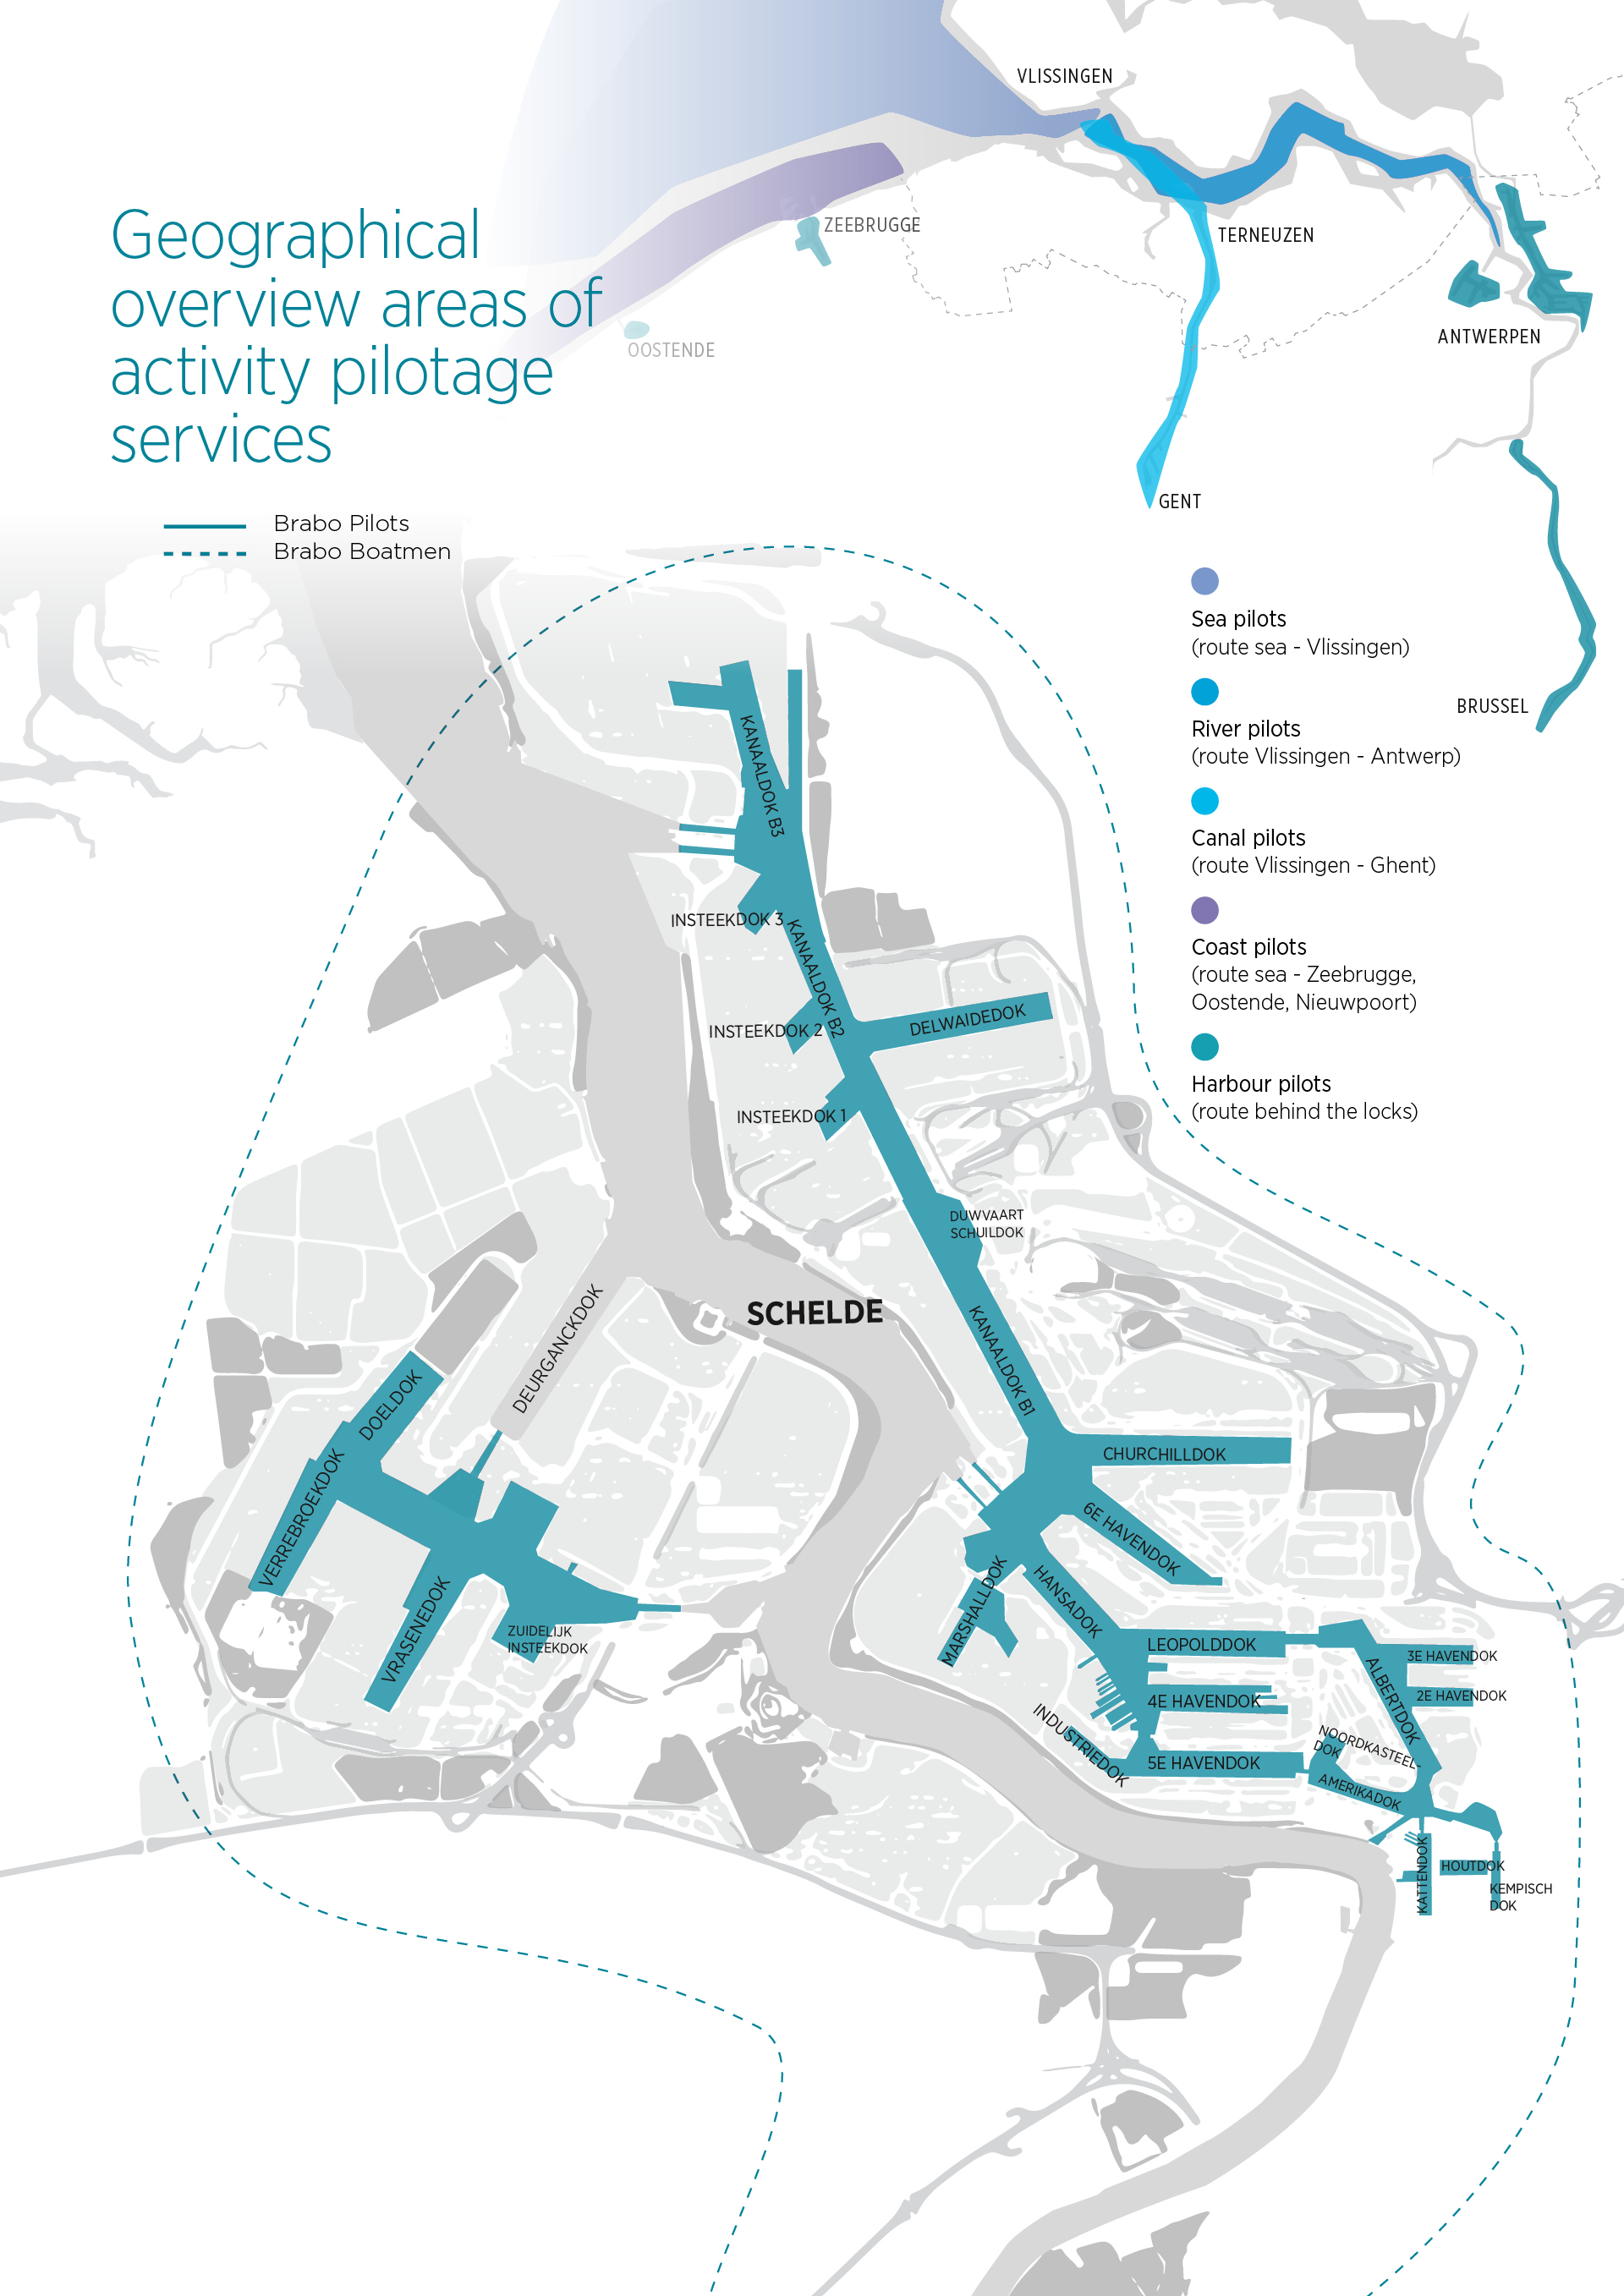 Overview areas of activity pilotage services